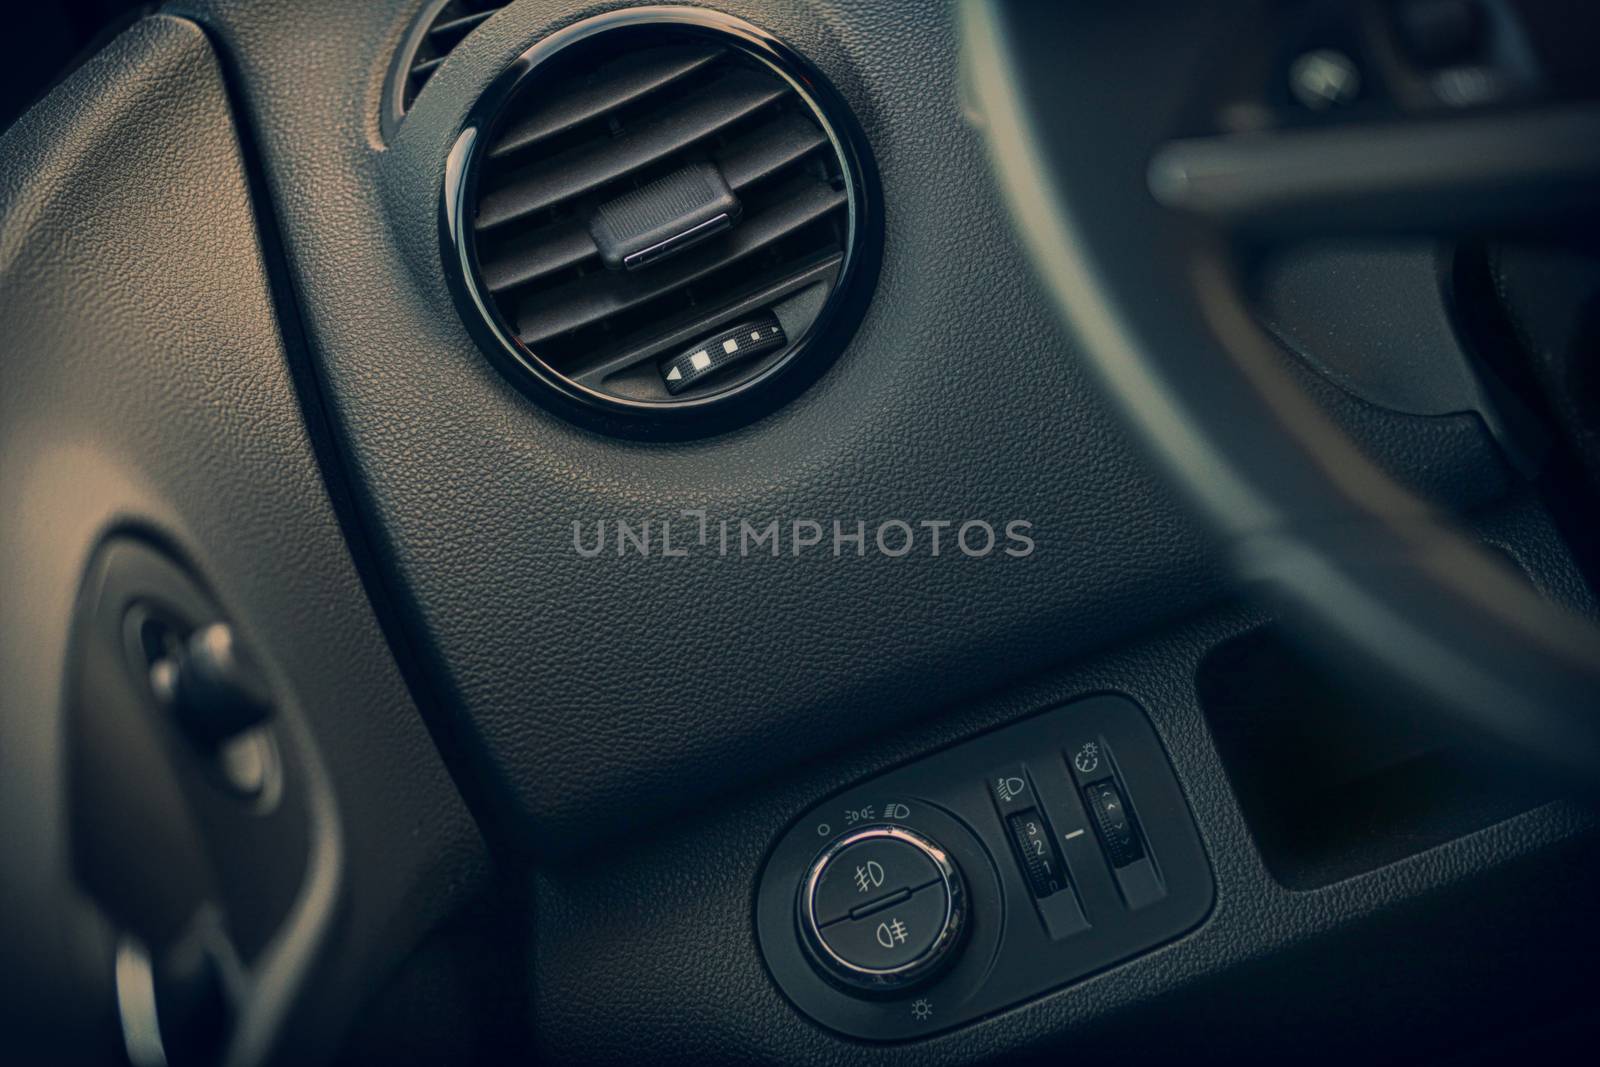 Details of air conditioning and controls of modern car by vladacanon